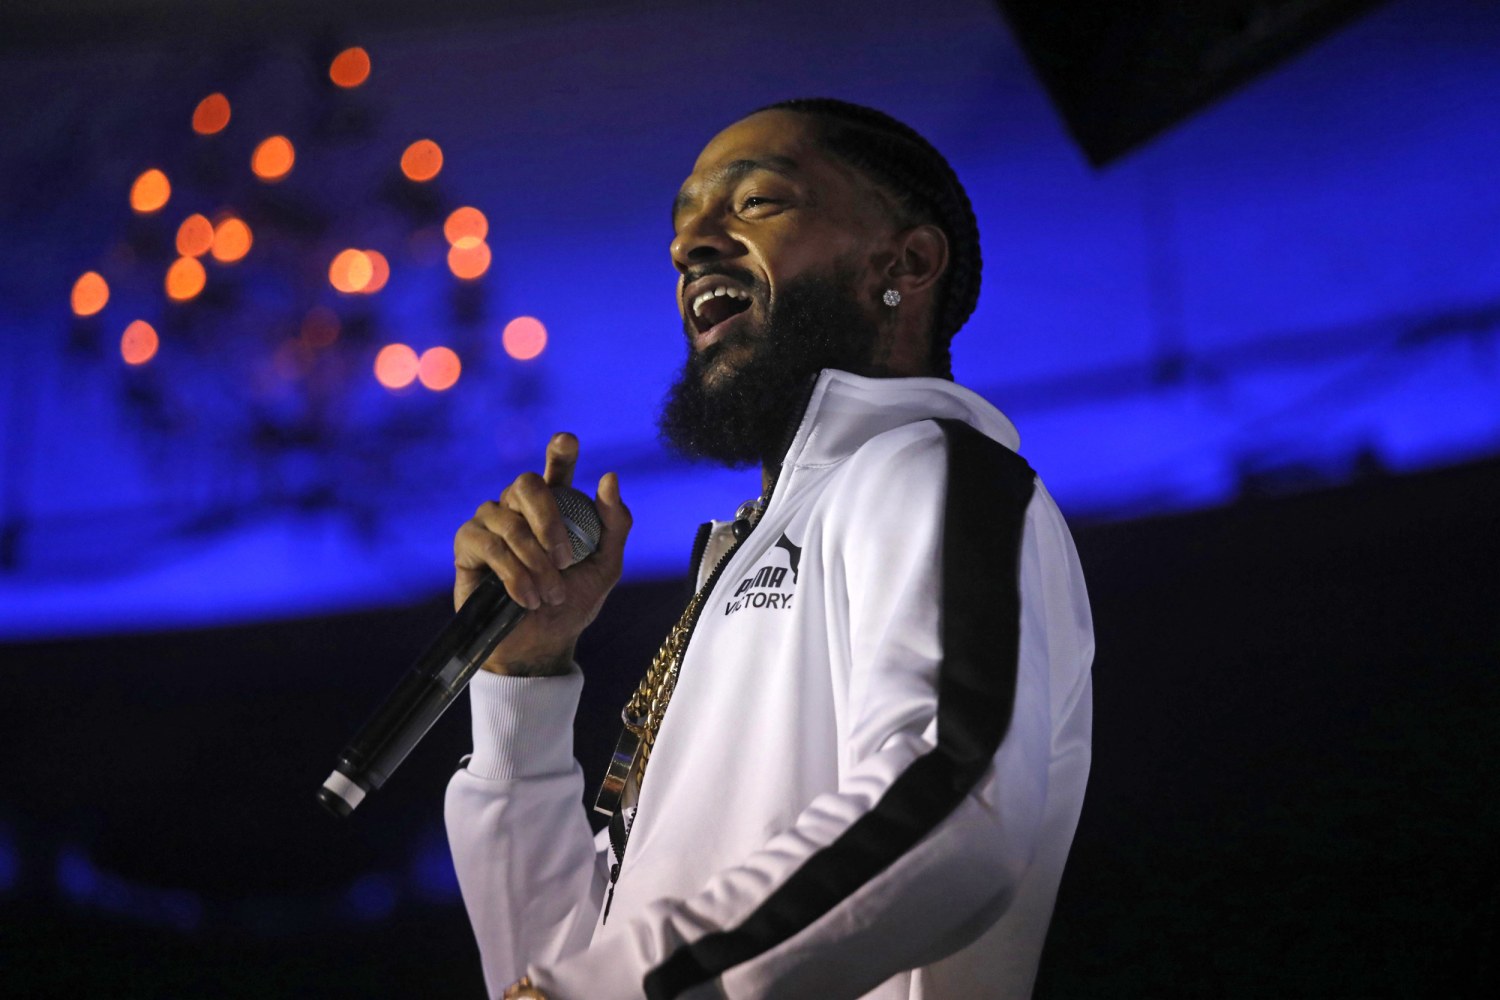 Meet Nipsey Hussle, the rapper who wants you to pay $1,000 for his